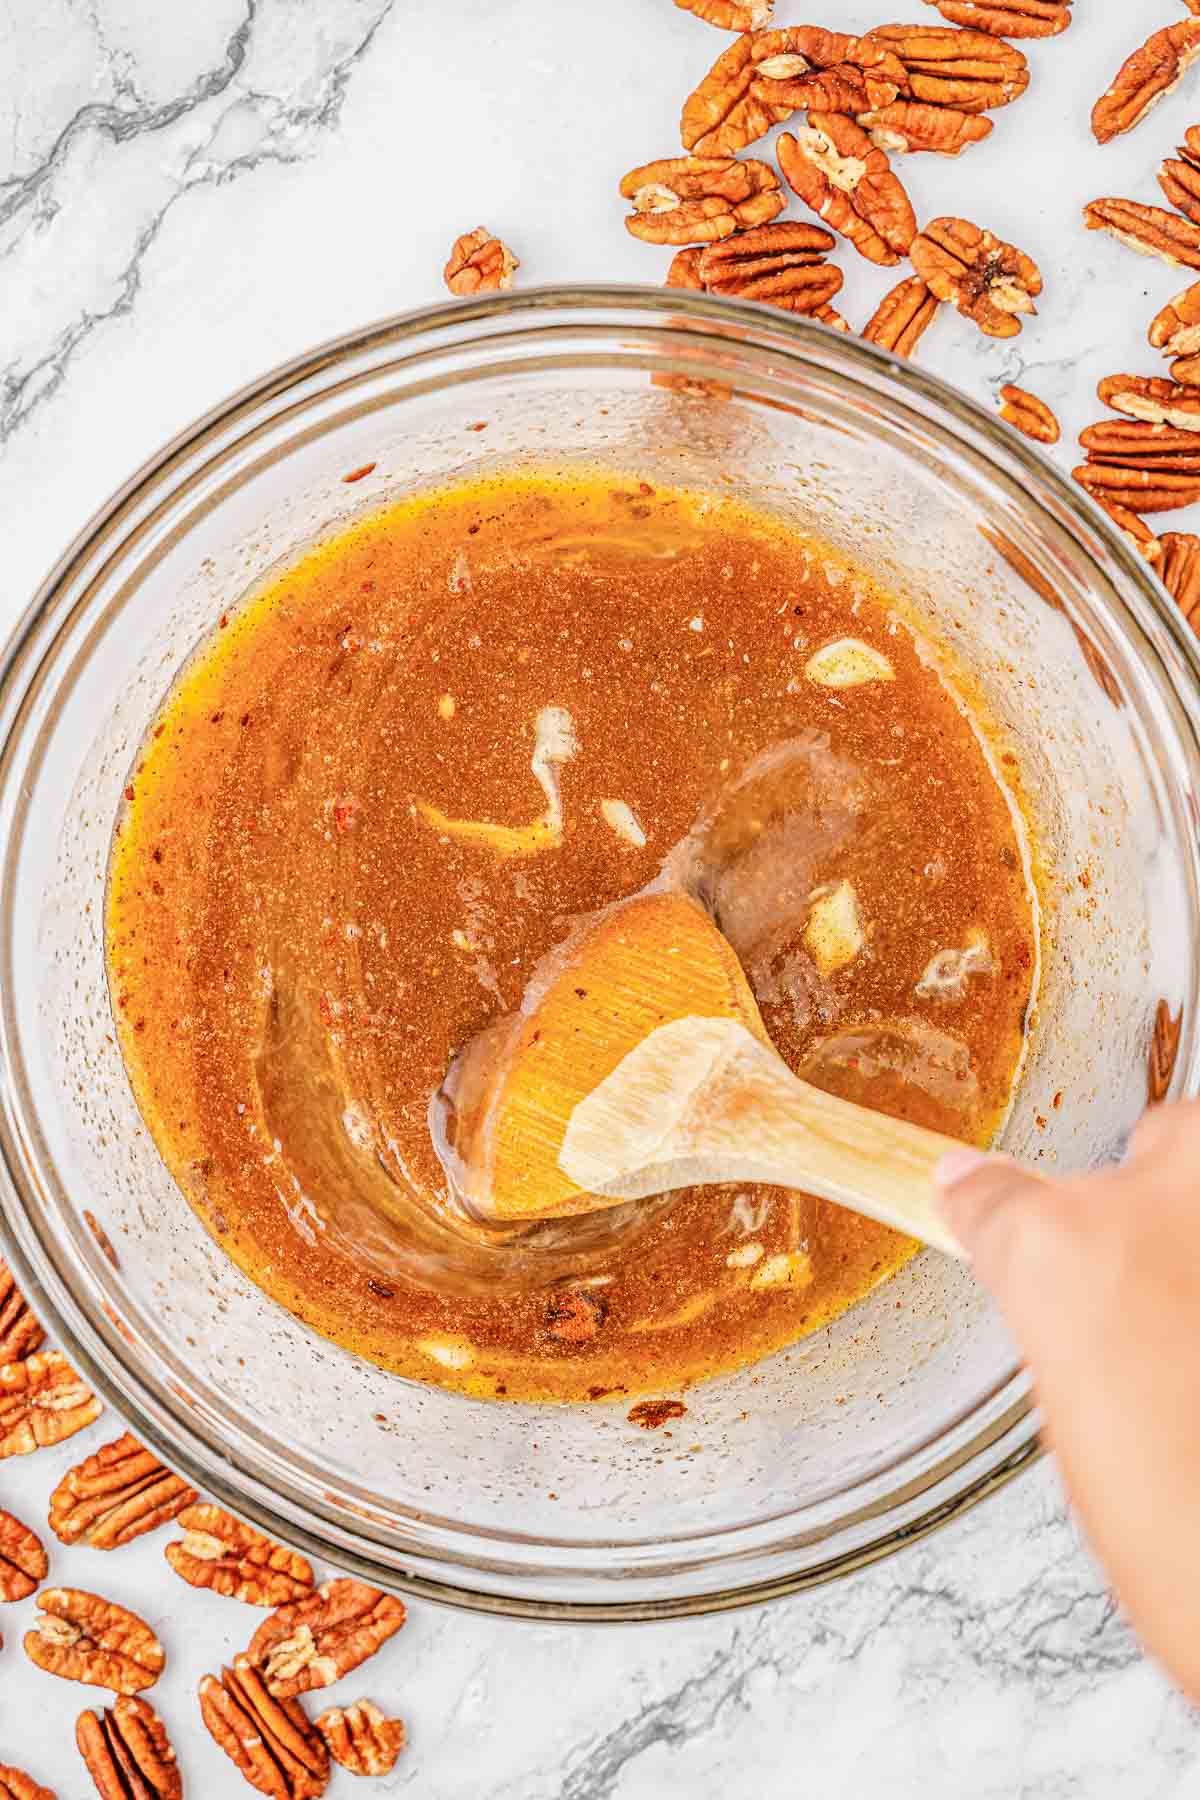 A person stirring a caramel like mixture in a glass bowl with a wooden spoon.